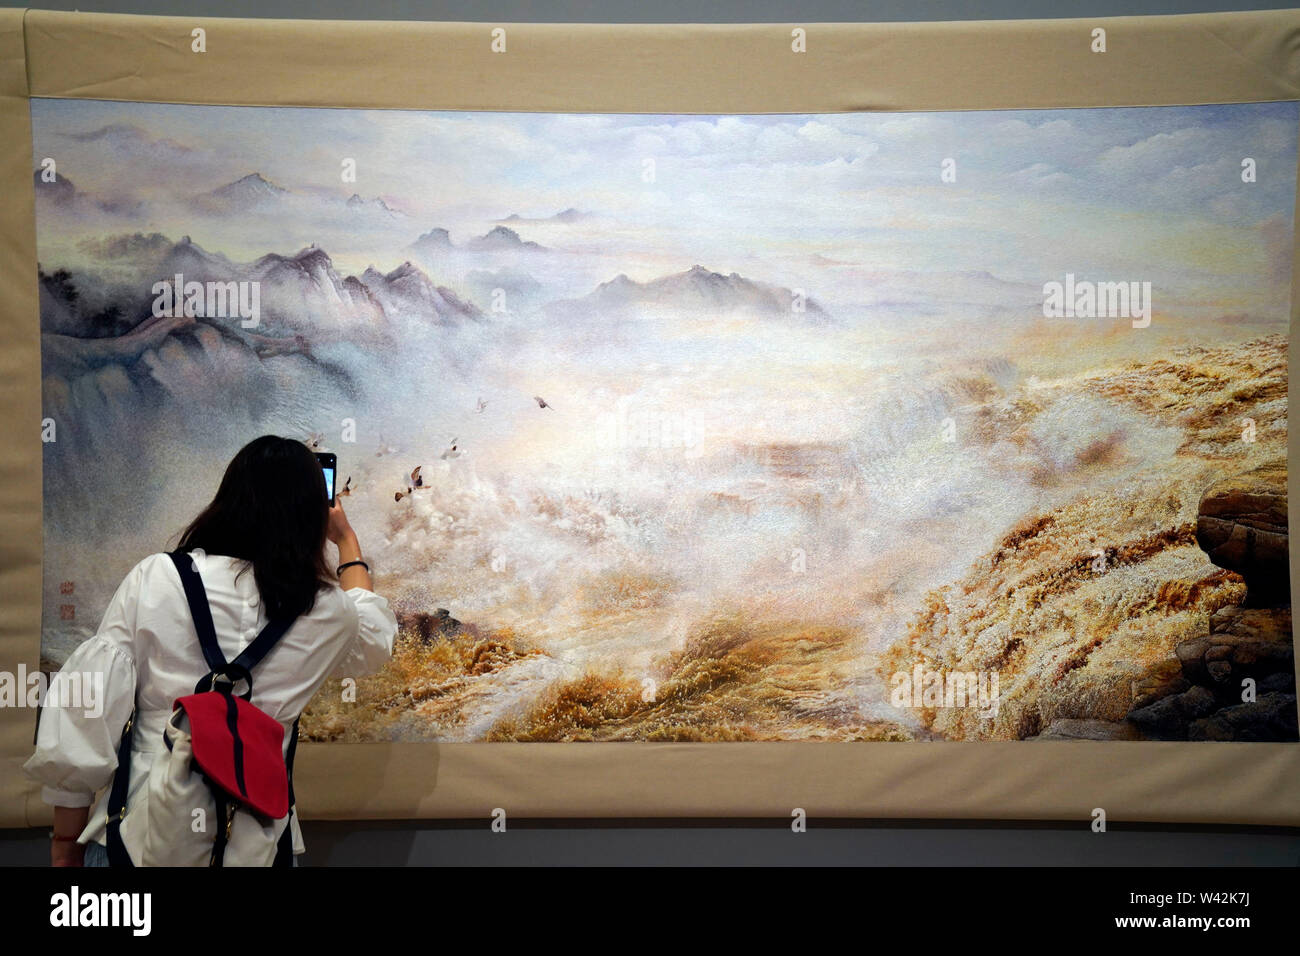 (190719) -- BEIJING, July 19, 2019 (Xinhua) -- A visitor takes photos of an exhibit during 'Splendid China -- Suzhou Embroidery Elaborate Art Works Exhibition' at the National Art Museum of China (NAMOC) in Beijing, capital of China, July 19, 2019. Opening here on Friday, the exhibition displays a rich collection of works by China's Suzhou embroidery masters in the contemporary era. (Xinhua/Jin Liangkuai) Stock Photo